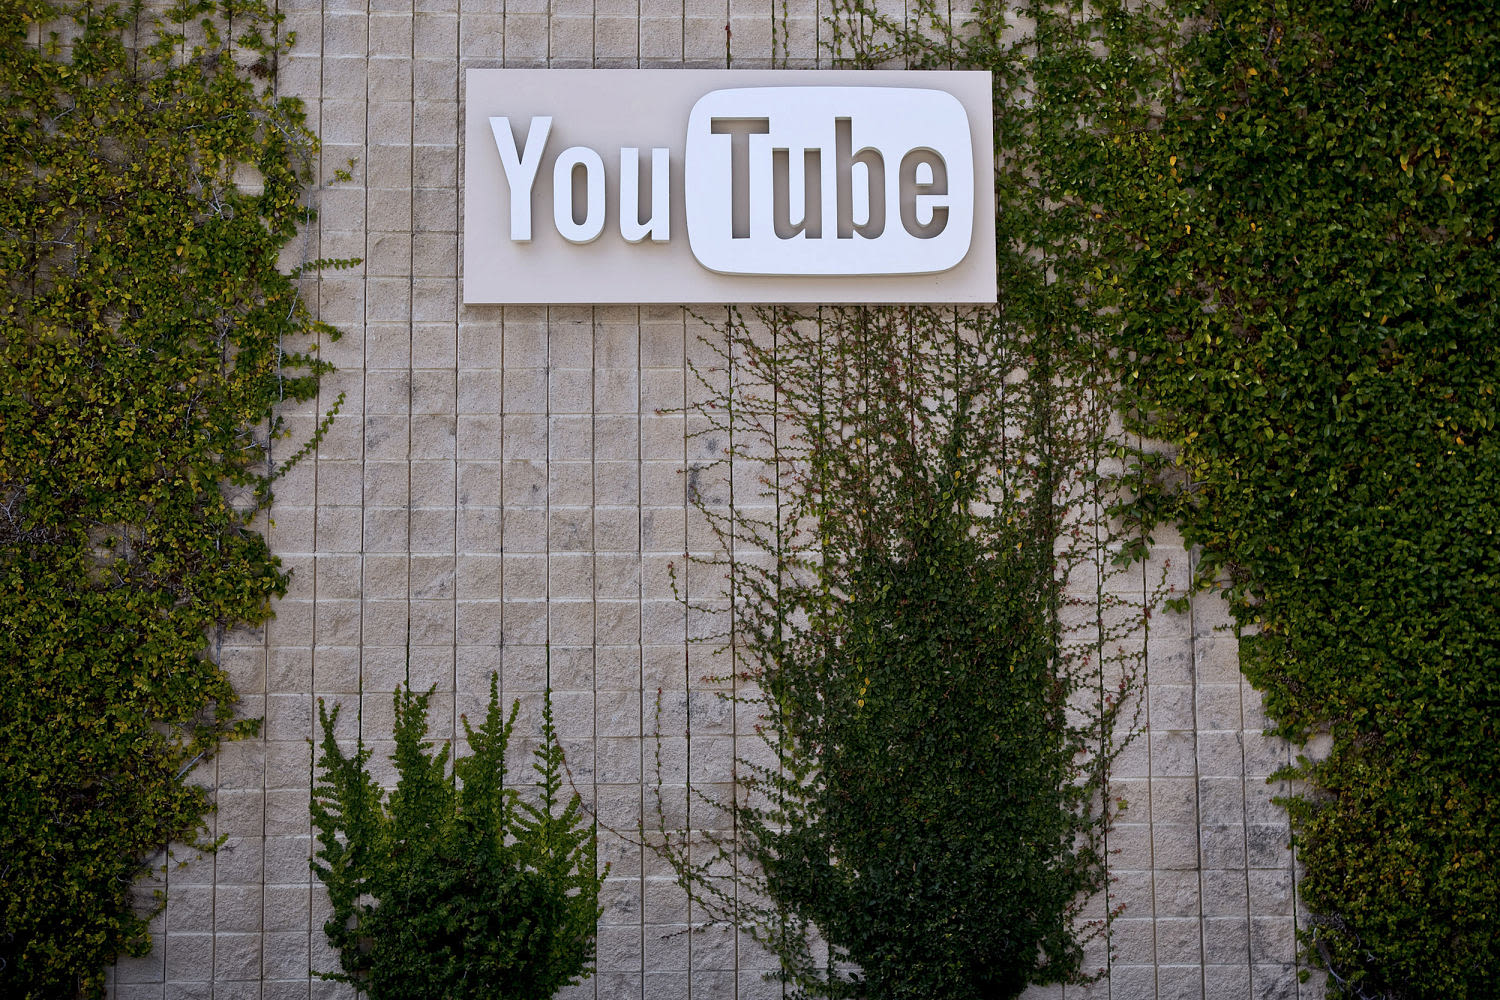 YouTube is implementing stricter rules around gun videos